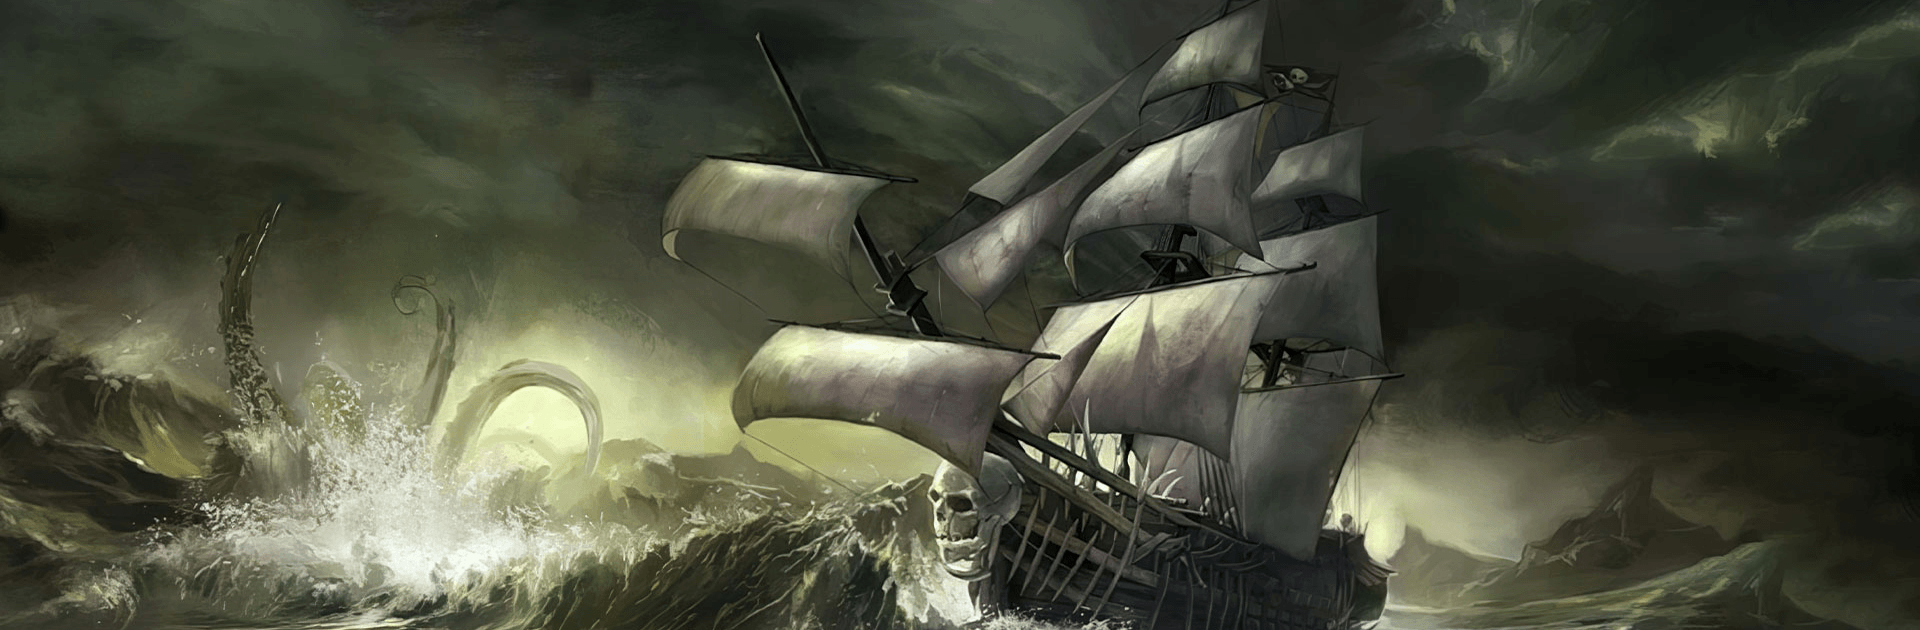 The Pirate: Plague of the Dead